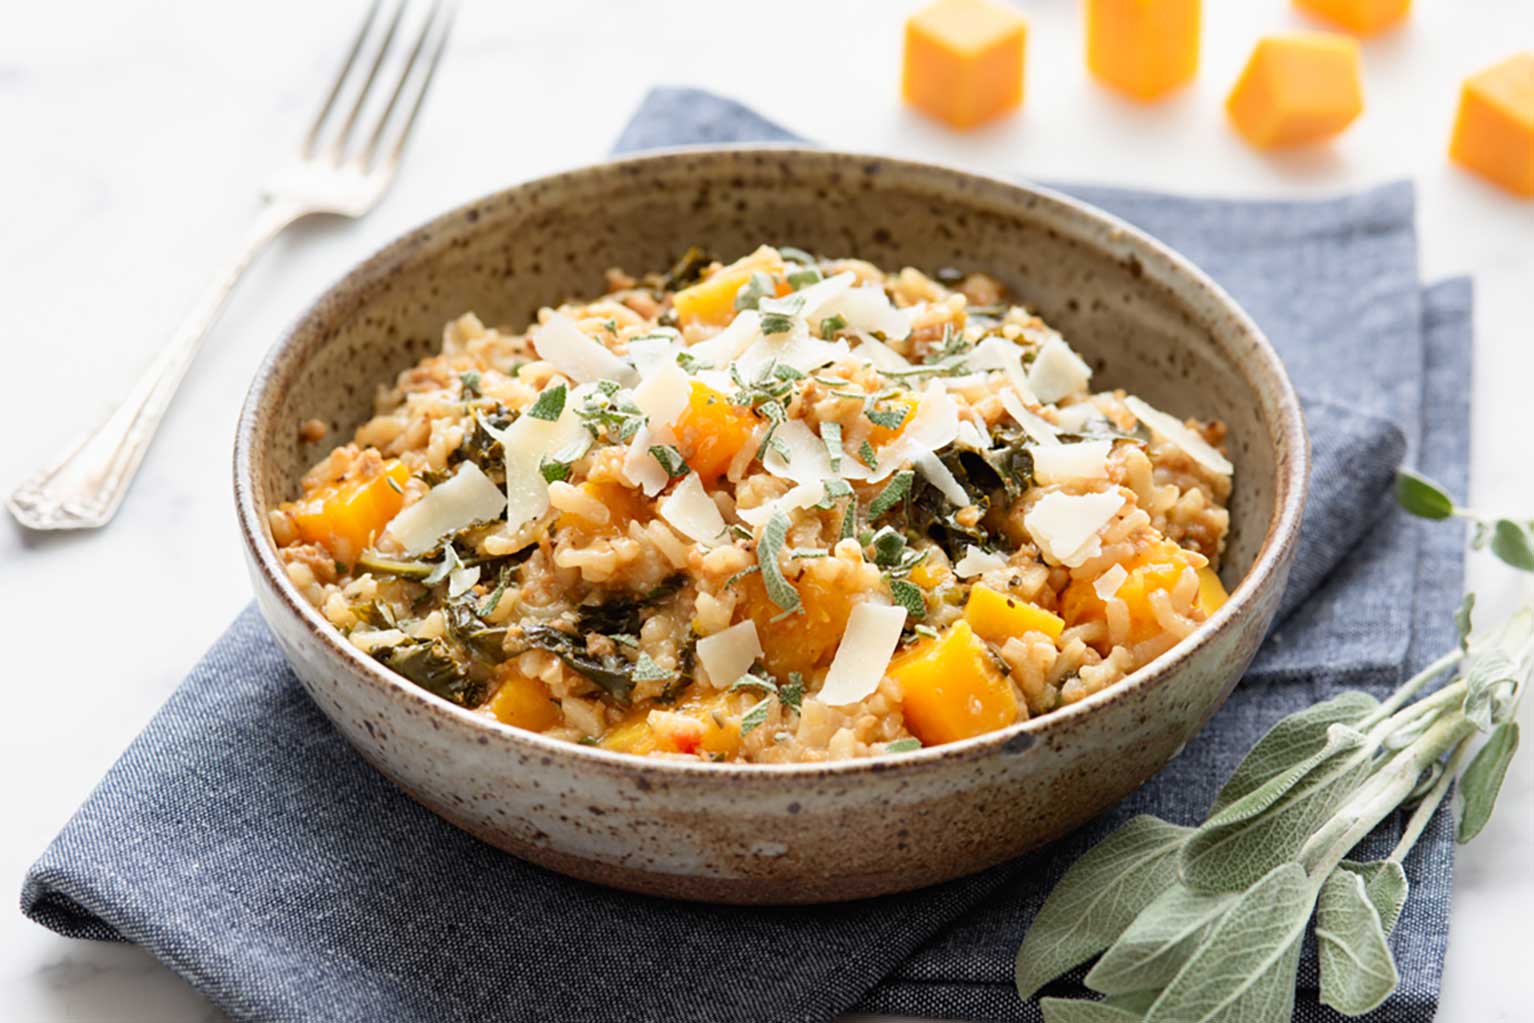 Risotto with butternut squash, sausage, and kale topped with fresh sage